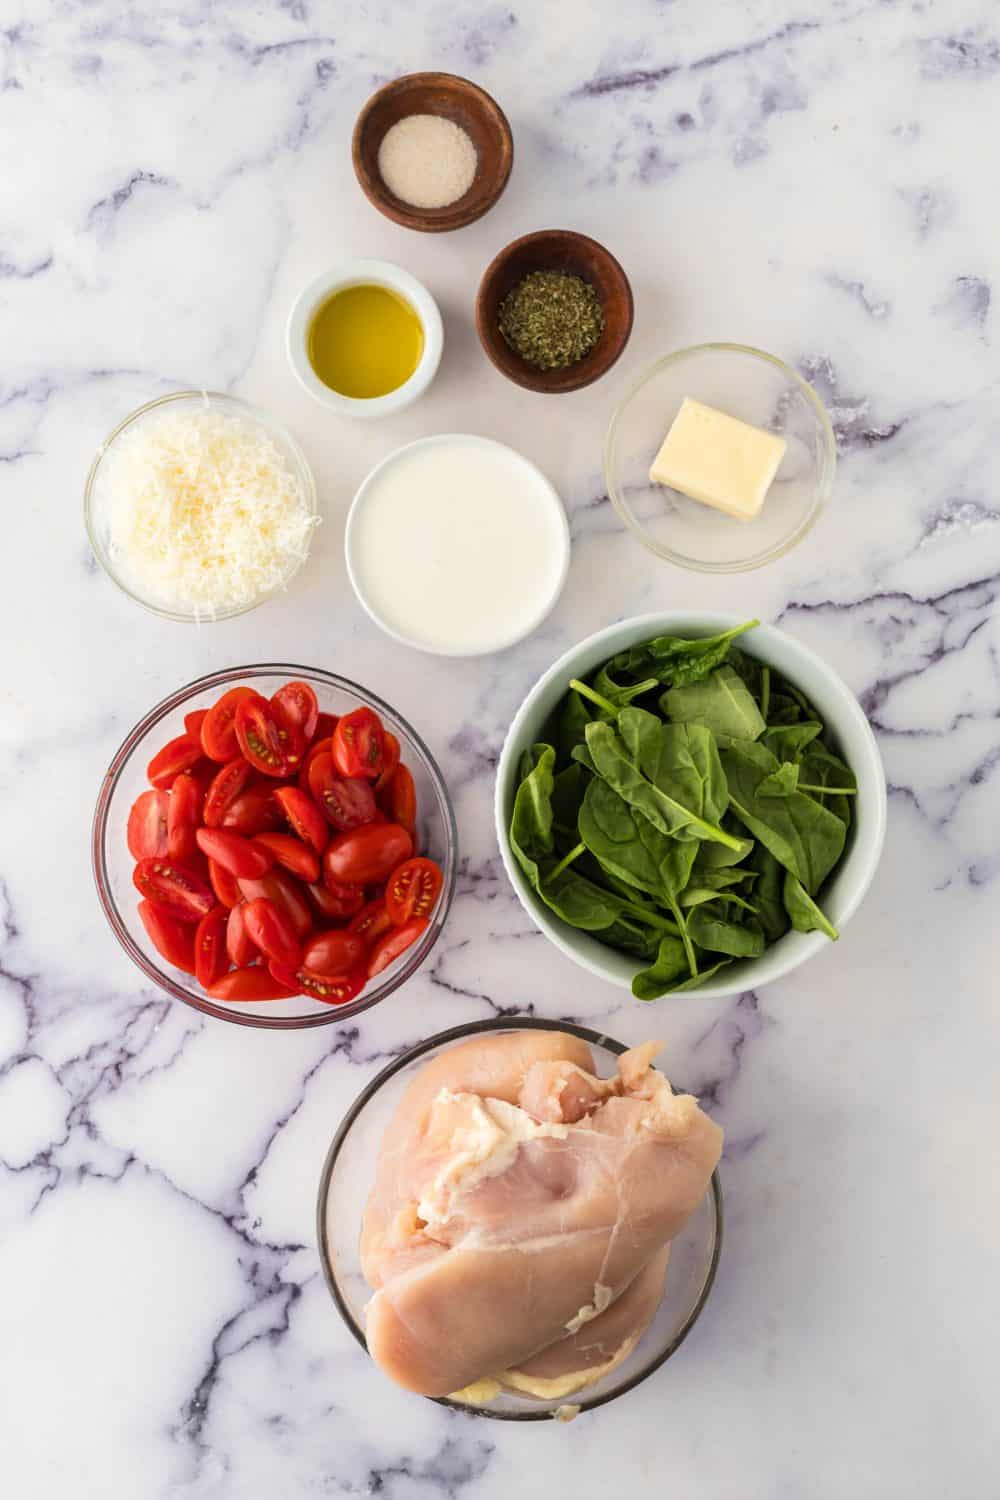 Ingredients for creamy tuscan chicken.